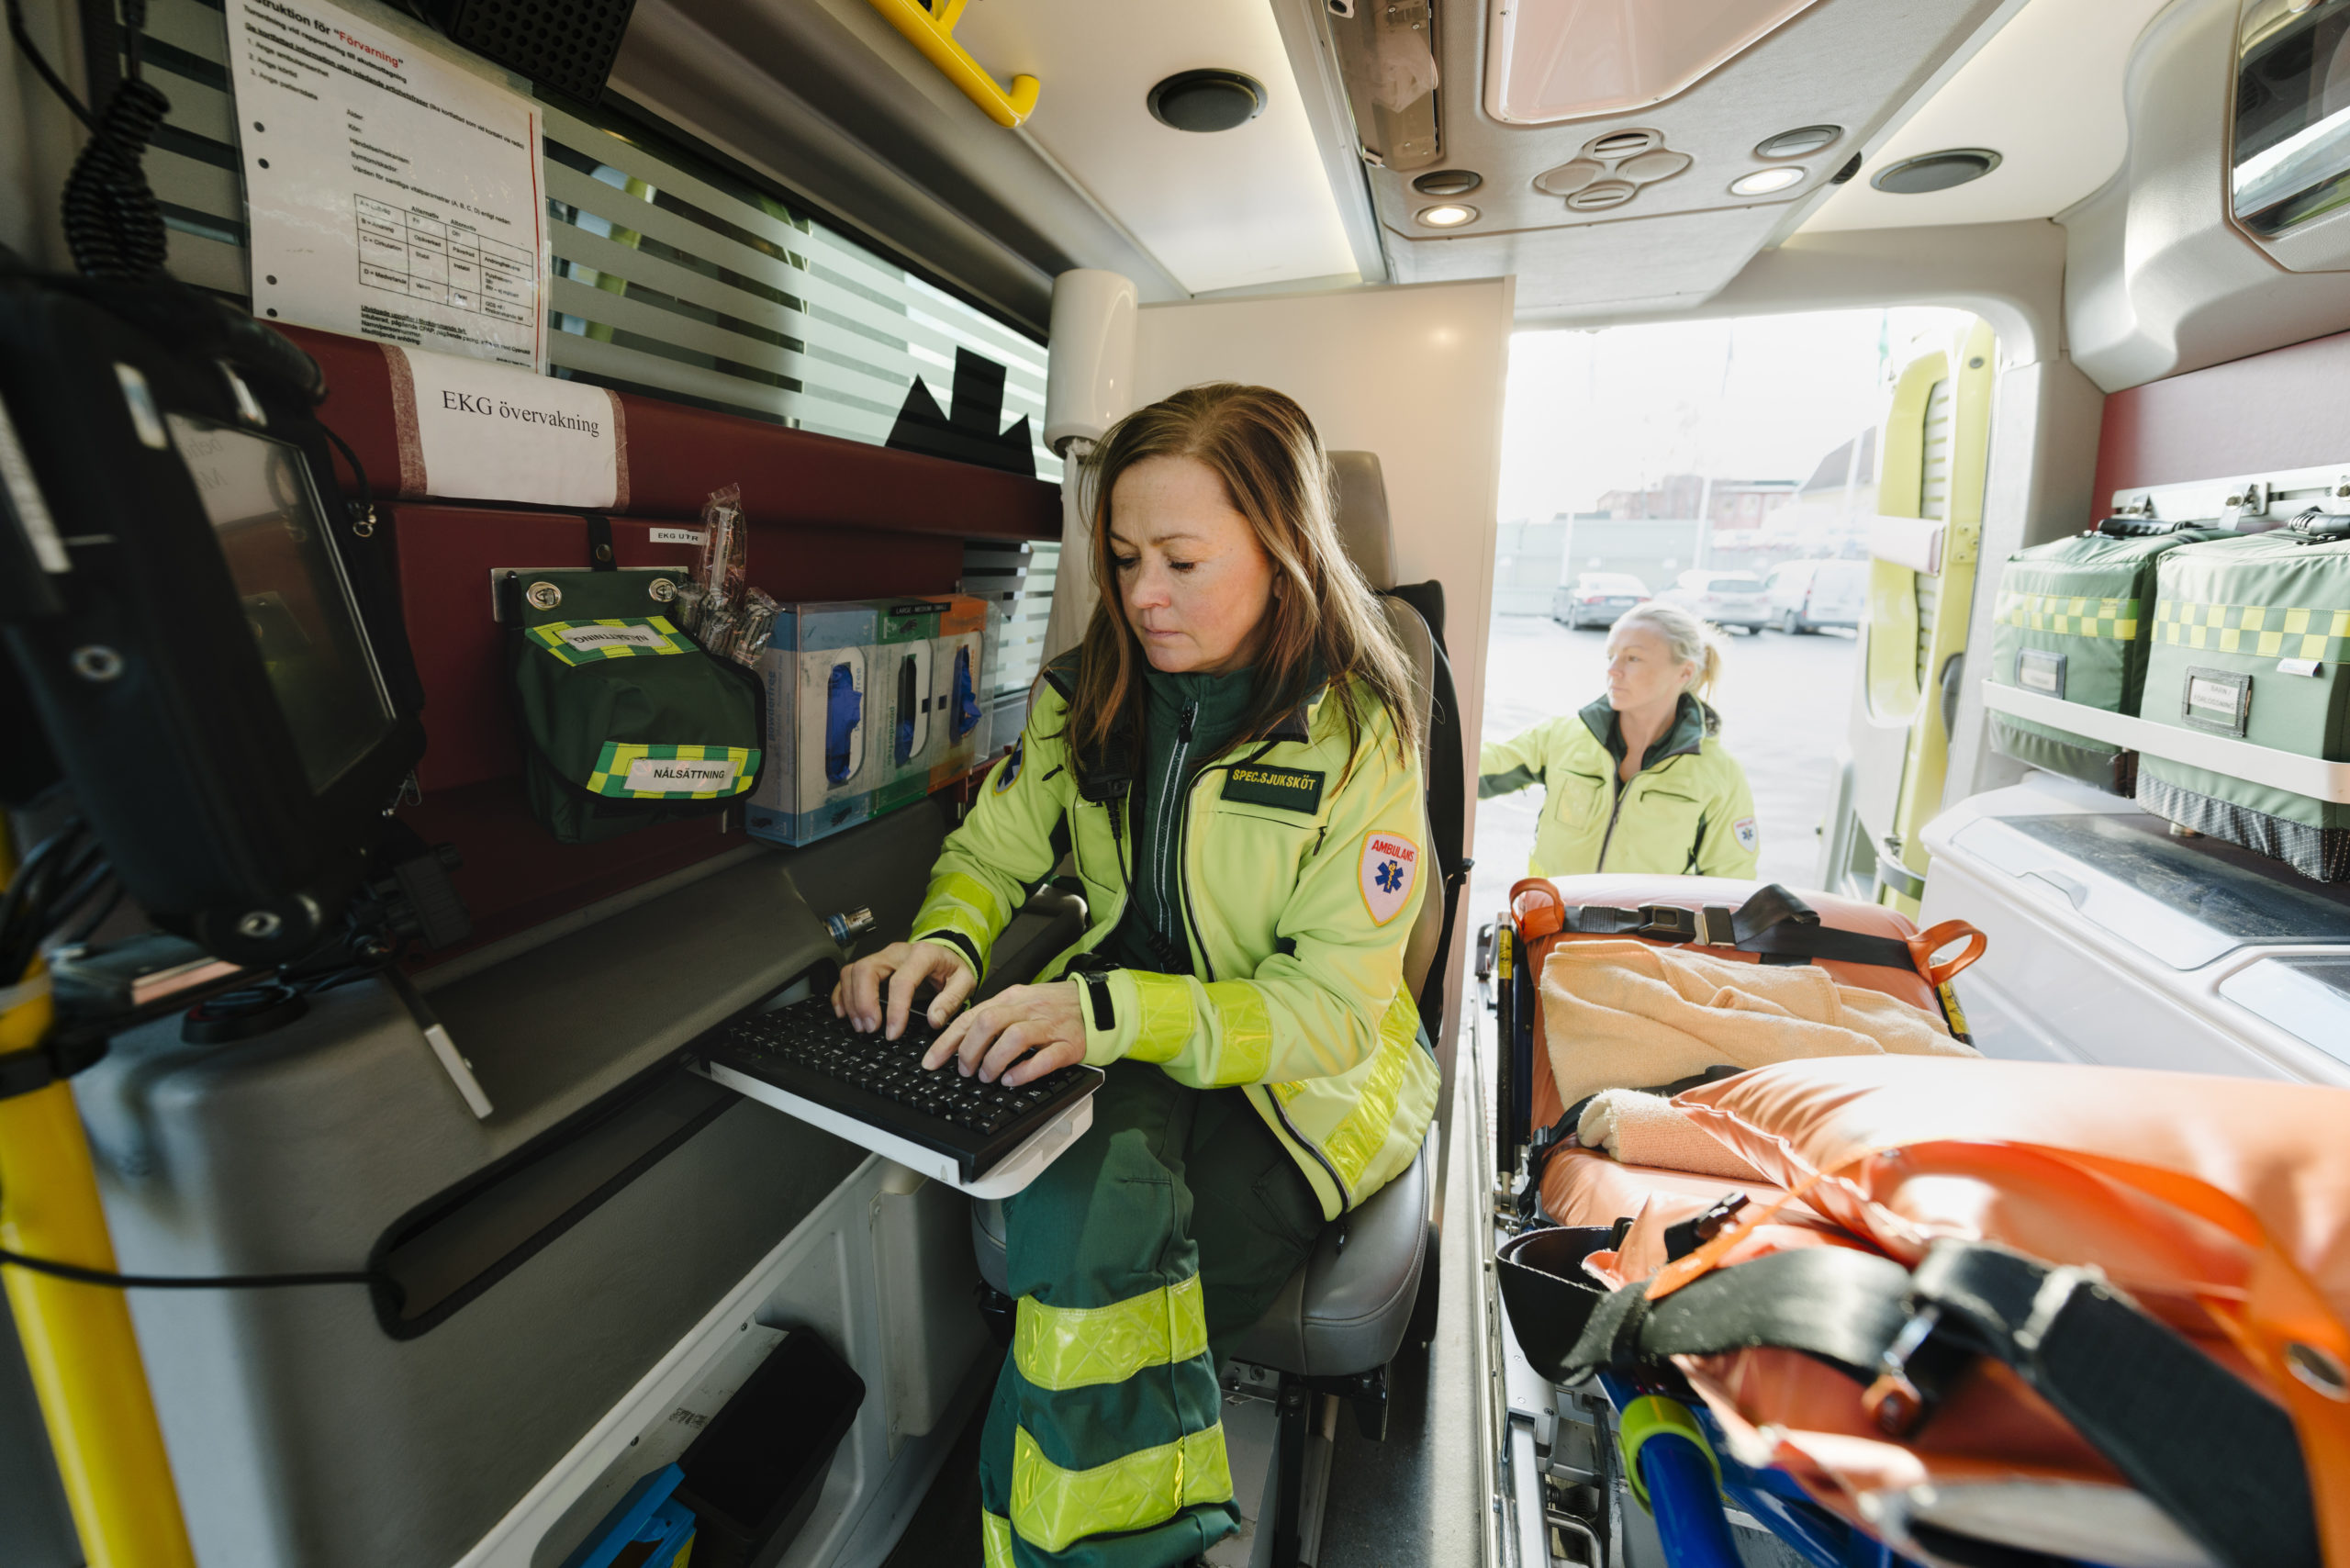 Paramedic using computer in ambulance while colleague standing in background